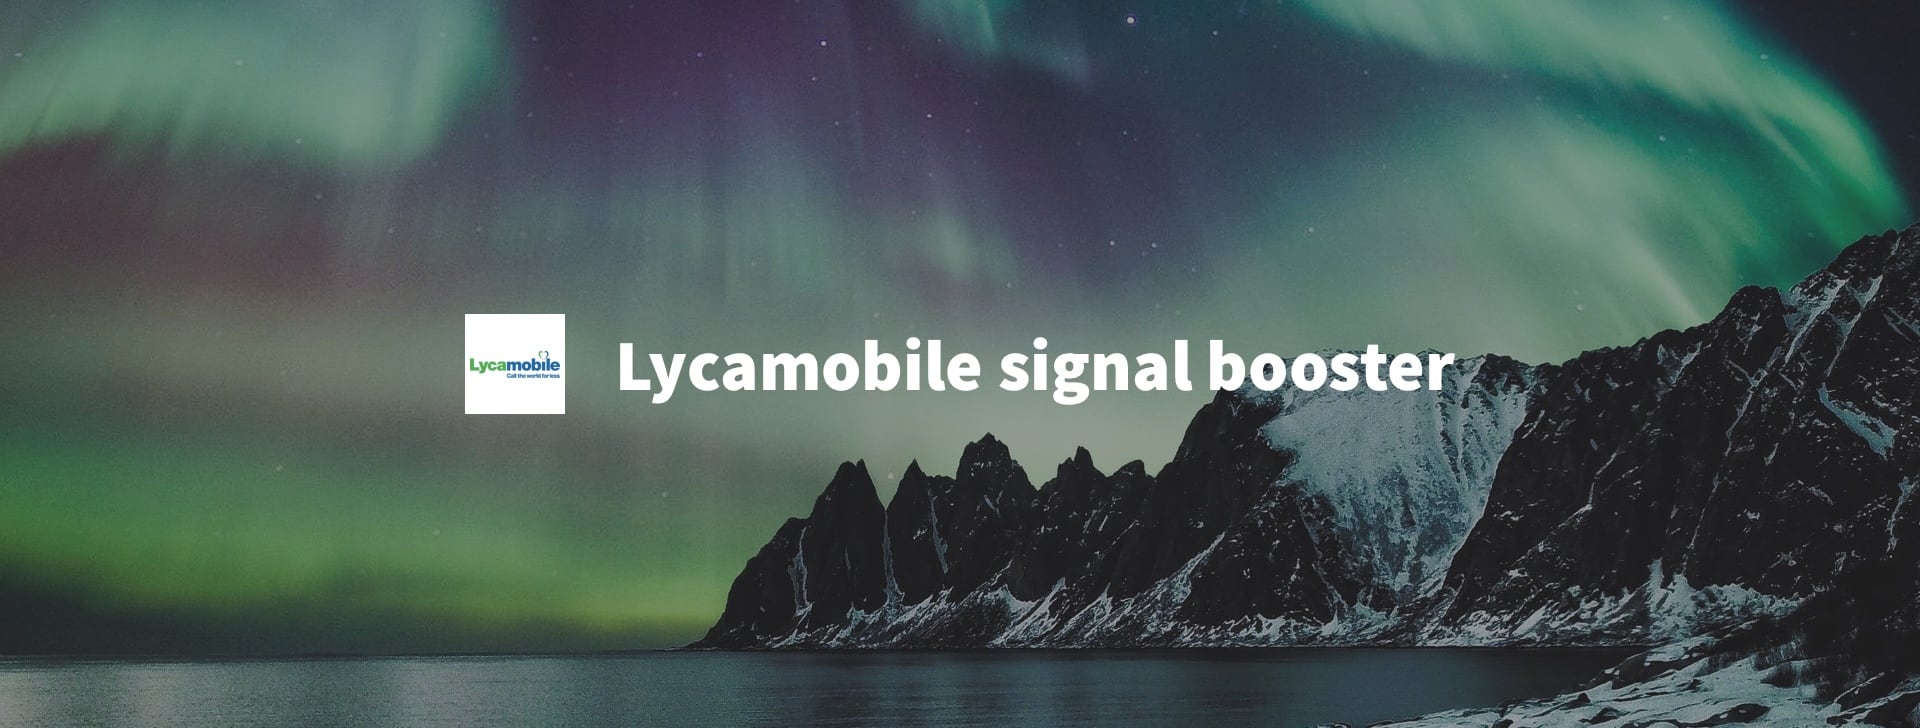 Lycamobile mobile signal